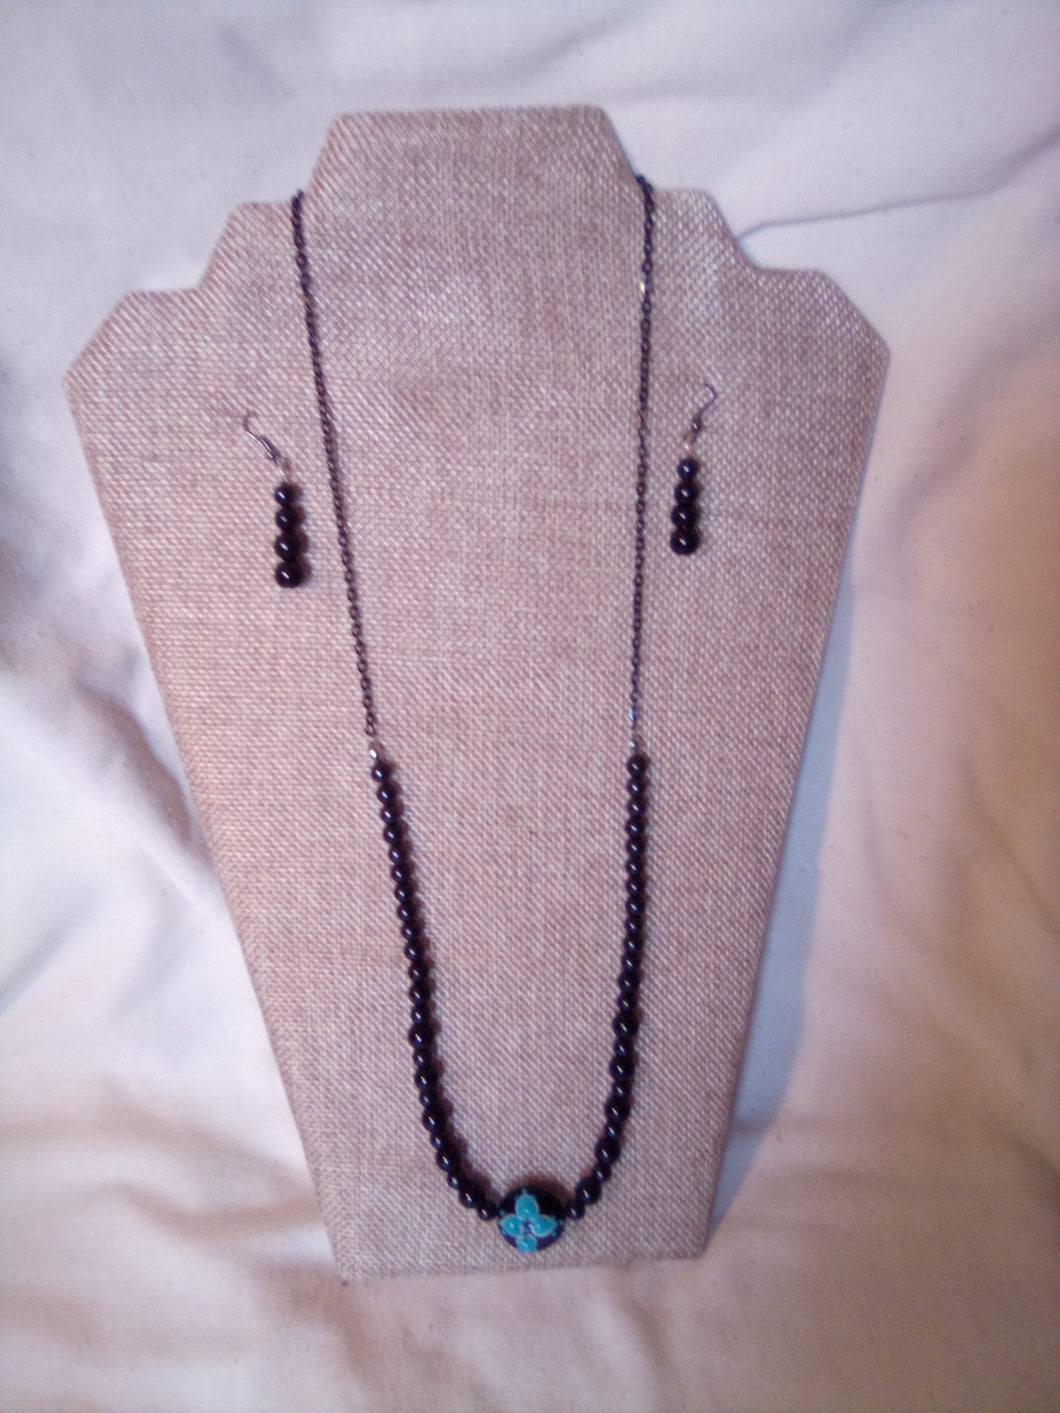 Black glass bead necklace with matching earrings